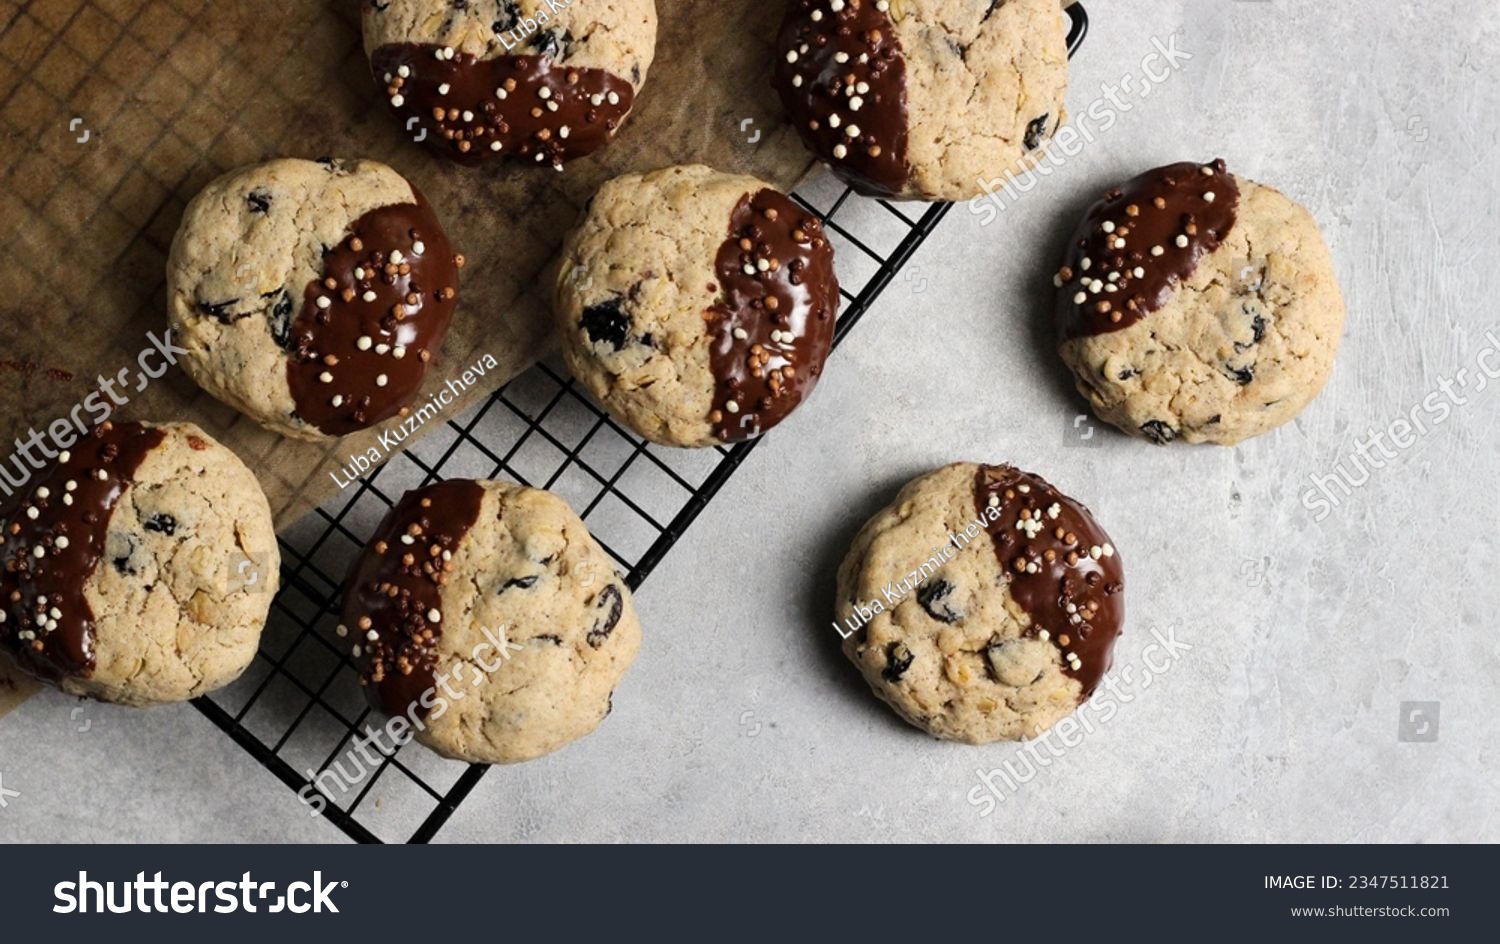 Close-up of oat cookies with raisins, dipped in chocolate and adorned with crispy bits, presented on a delicate background #2347511821